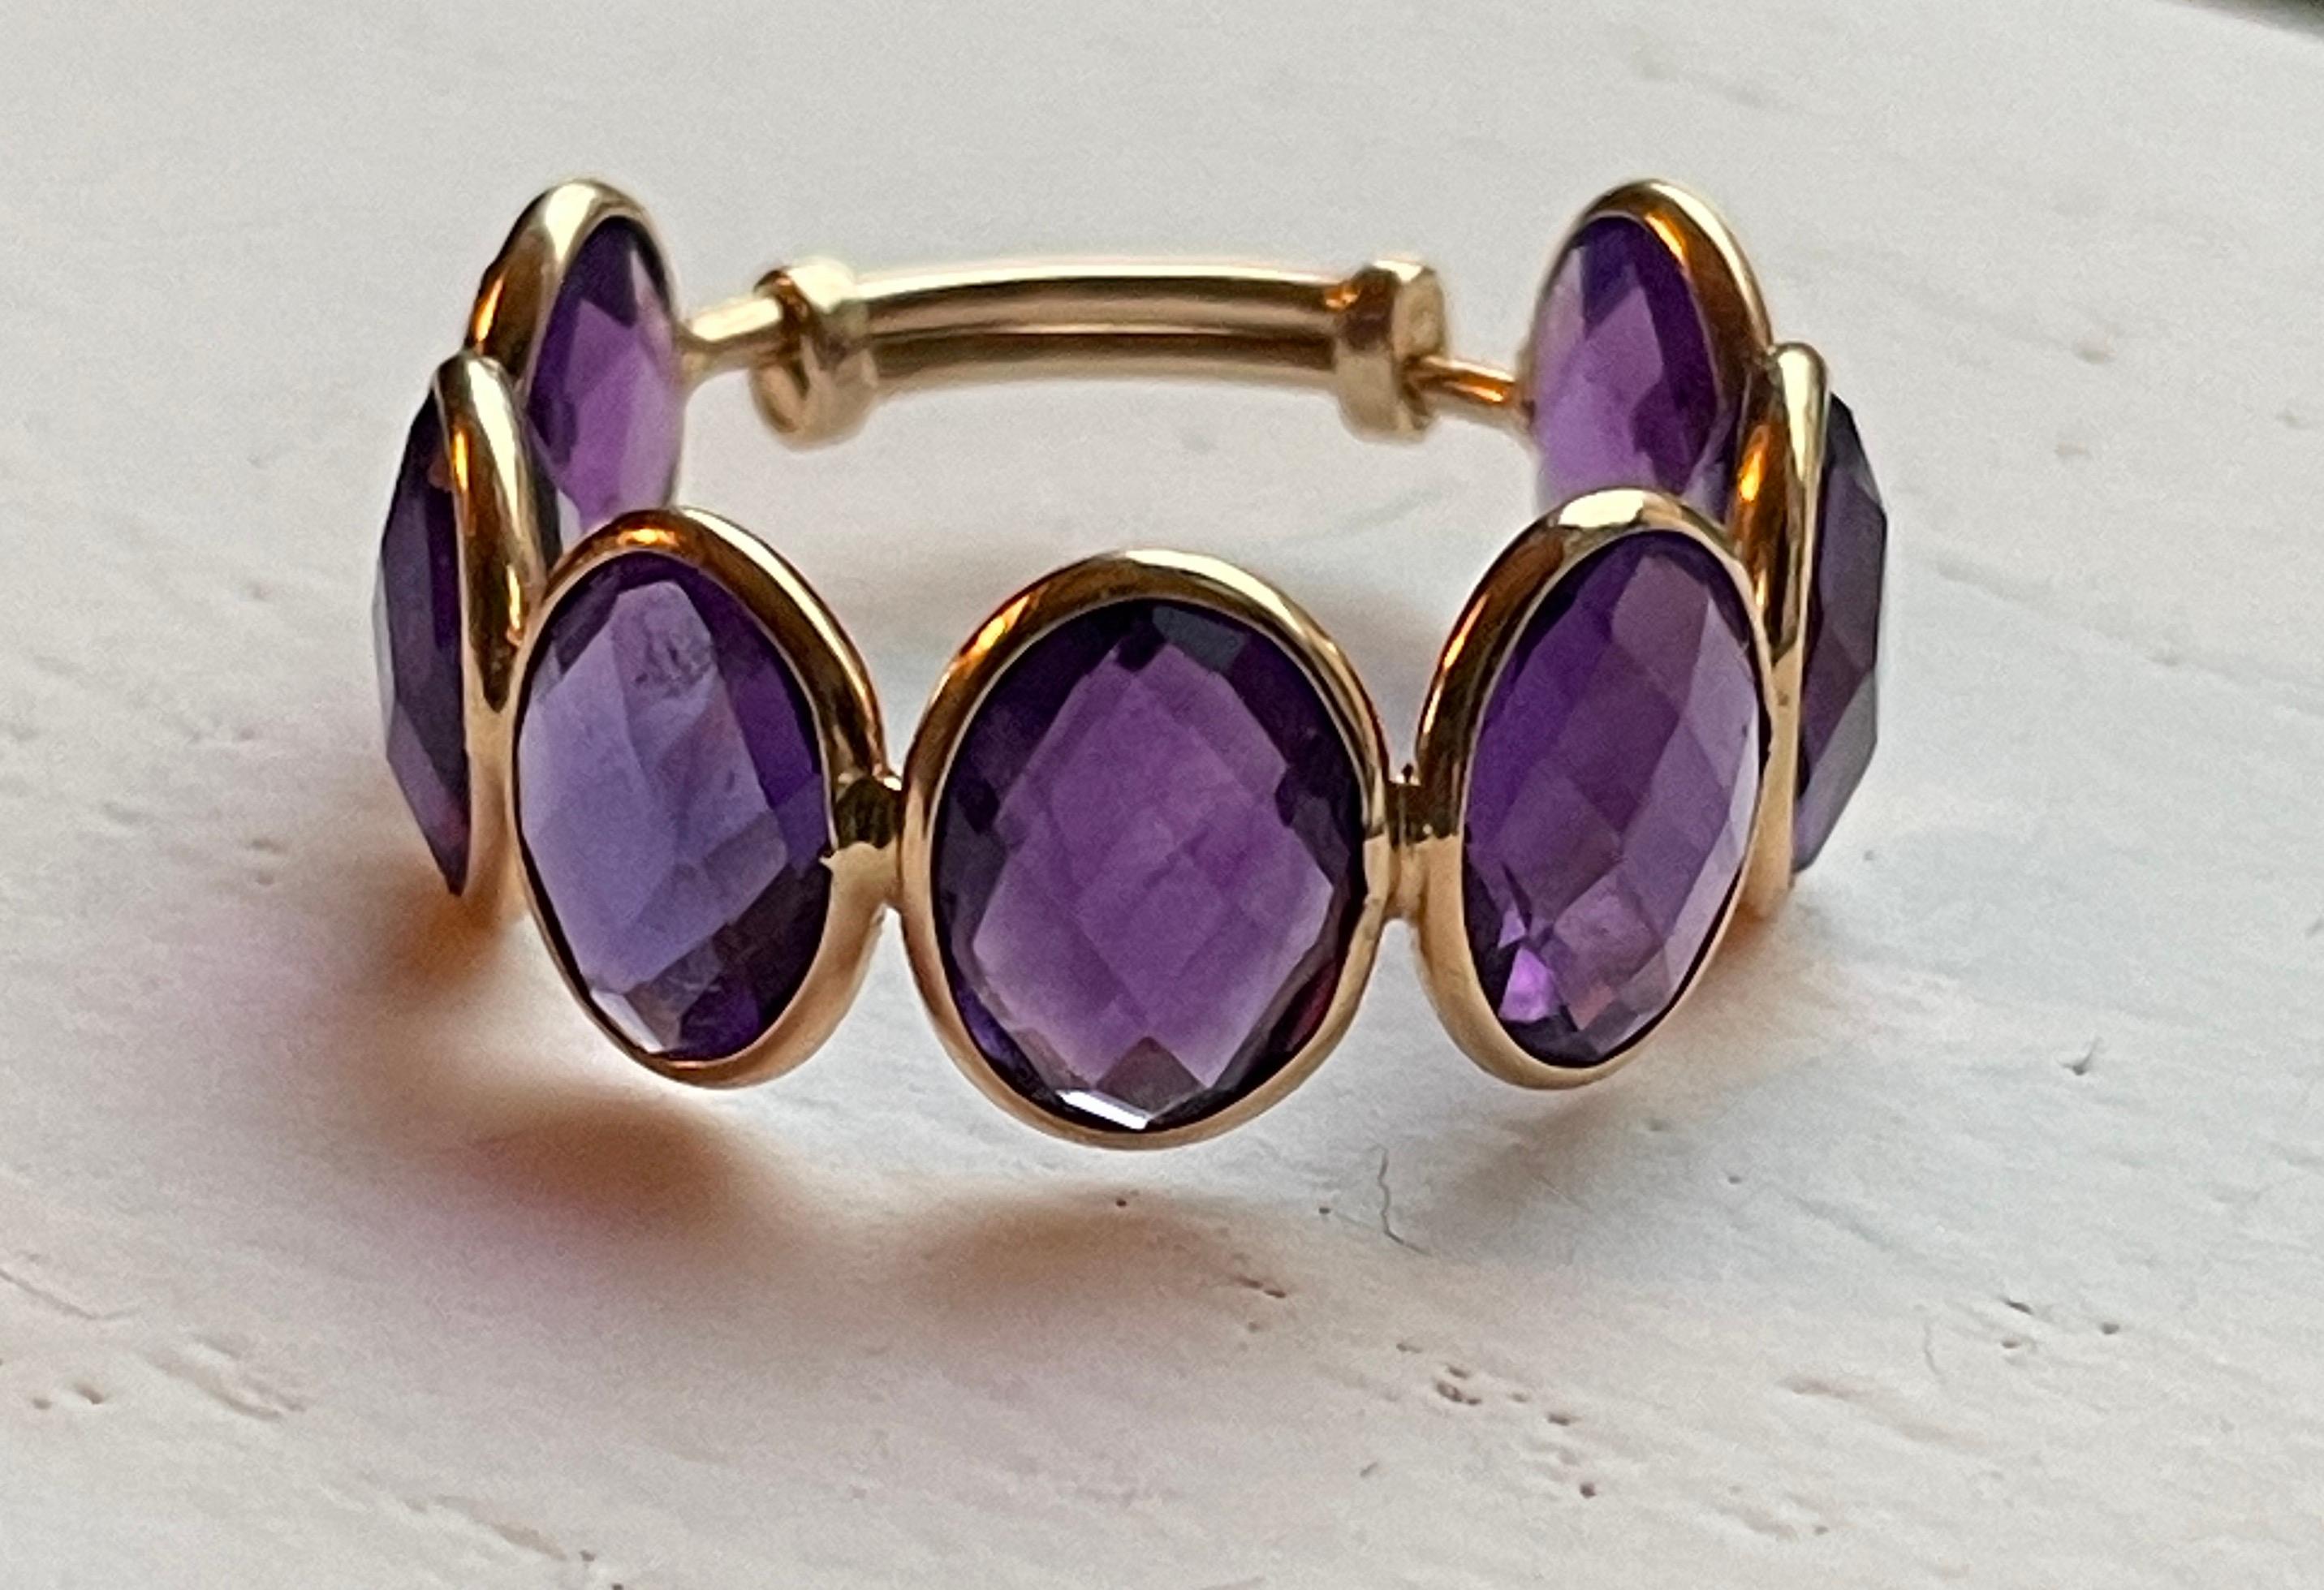 This 18K Gold ring is comprised of 7 checker cut oval Amethyst Stones. The stones are bezel set and checker cut allowing for maximum sparkle and shine. The ring is a size 7 with a built in adjustable sizer which will allow the ring to expand to size